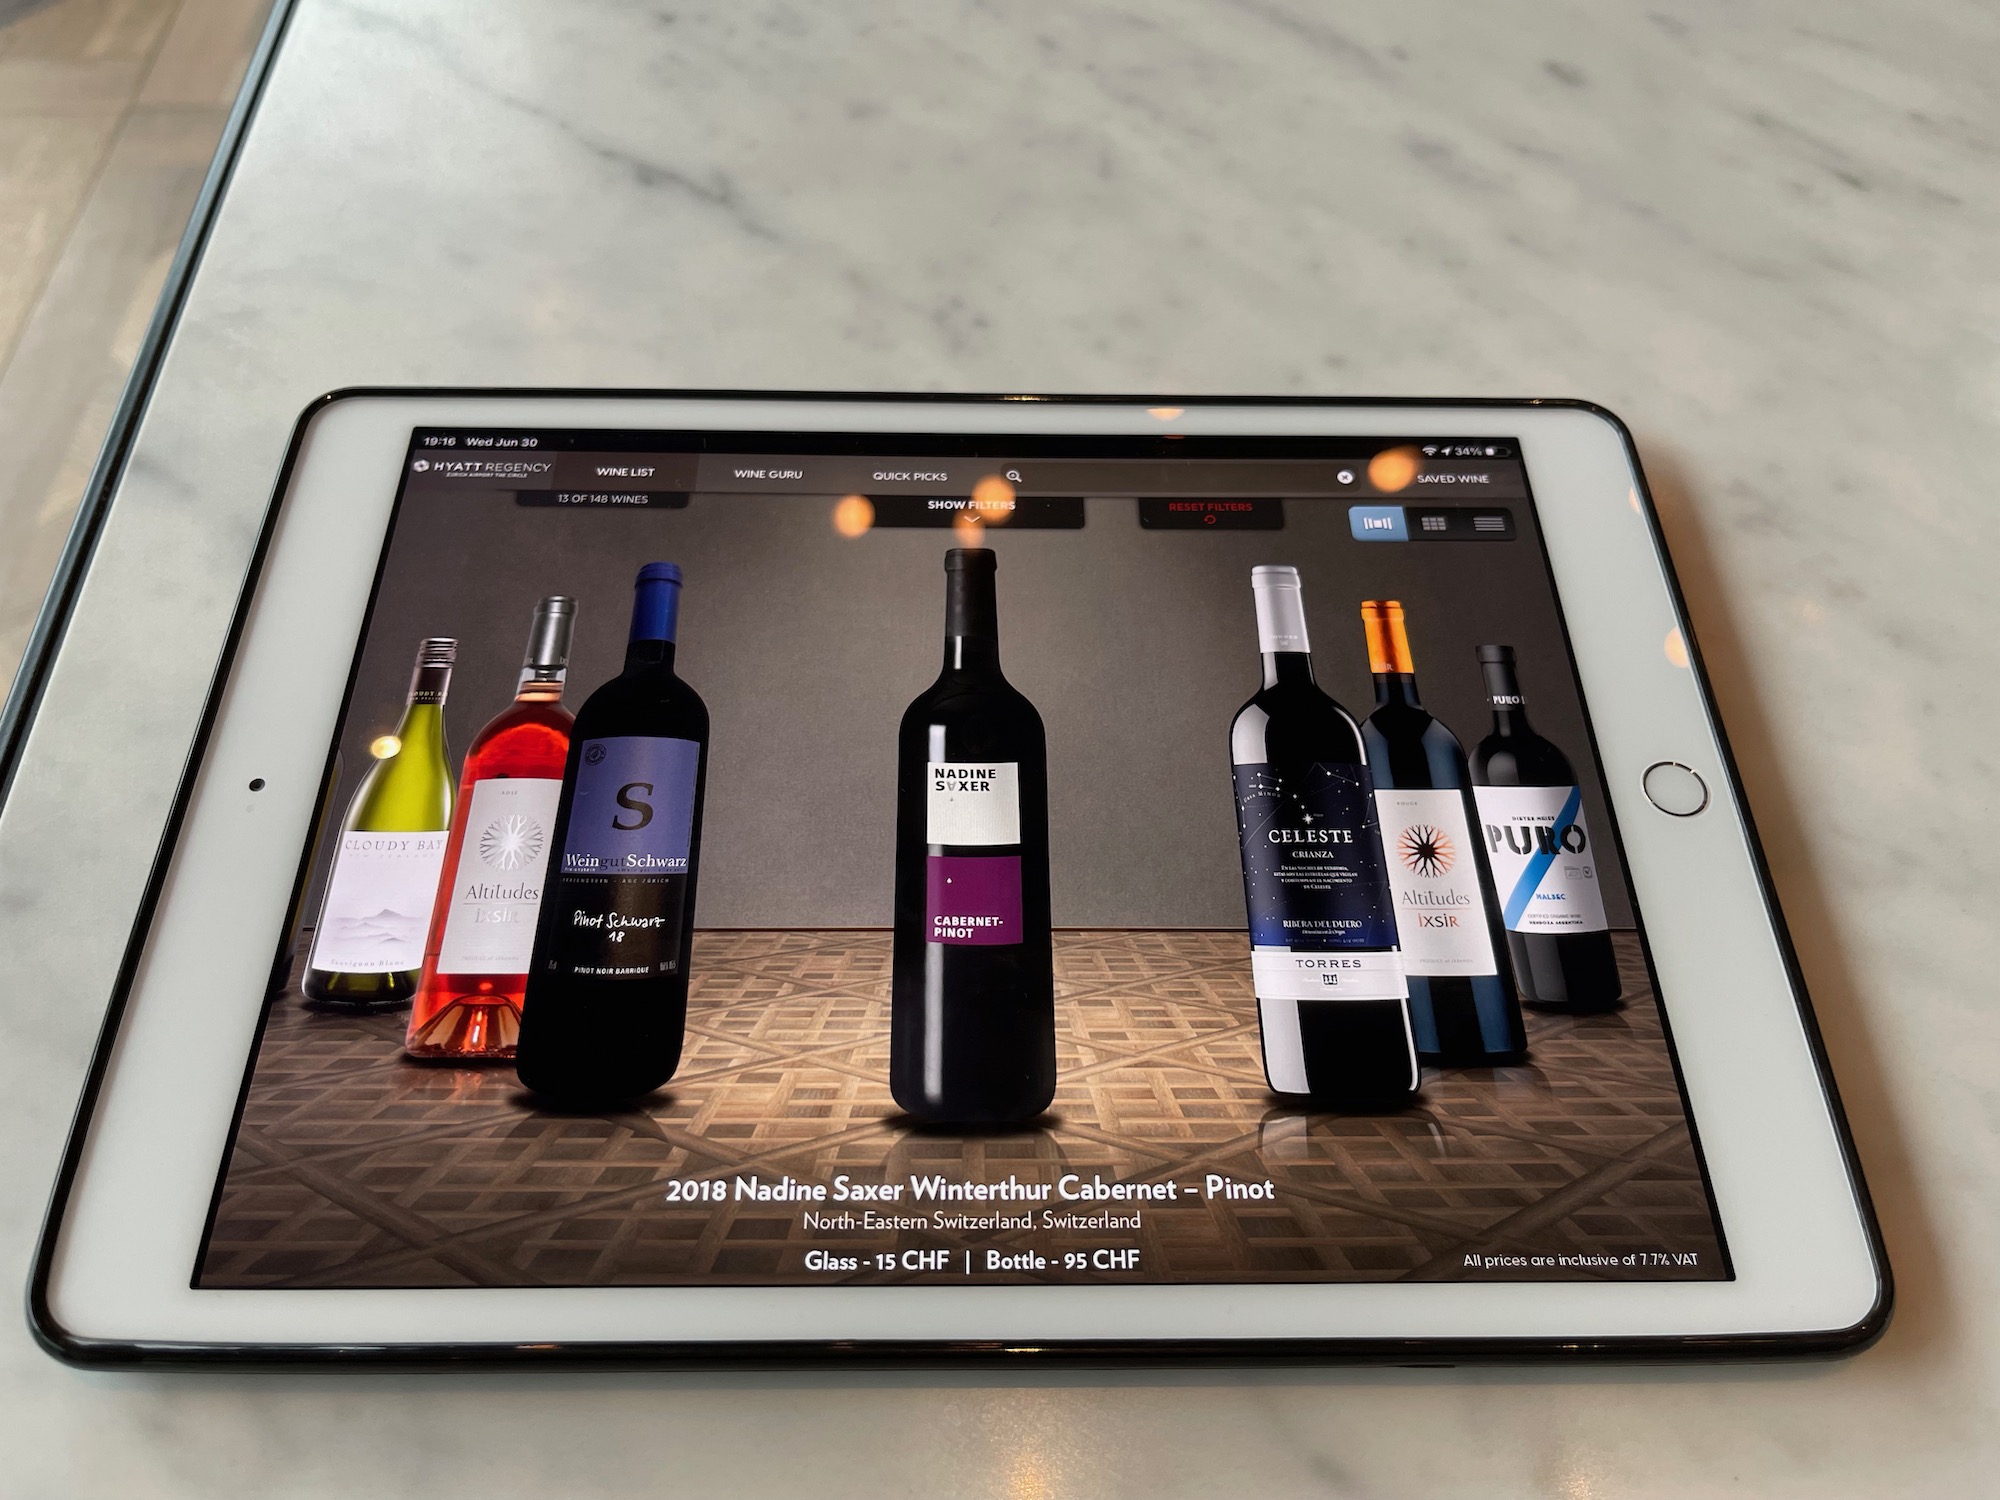 a tablet with a picture of wine bottles on the screen